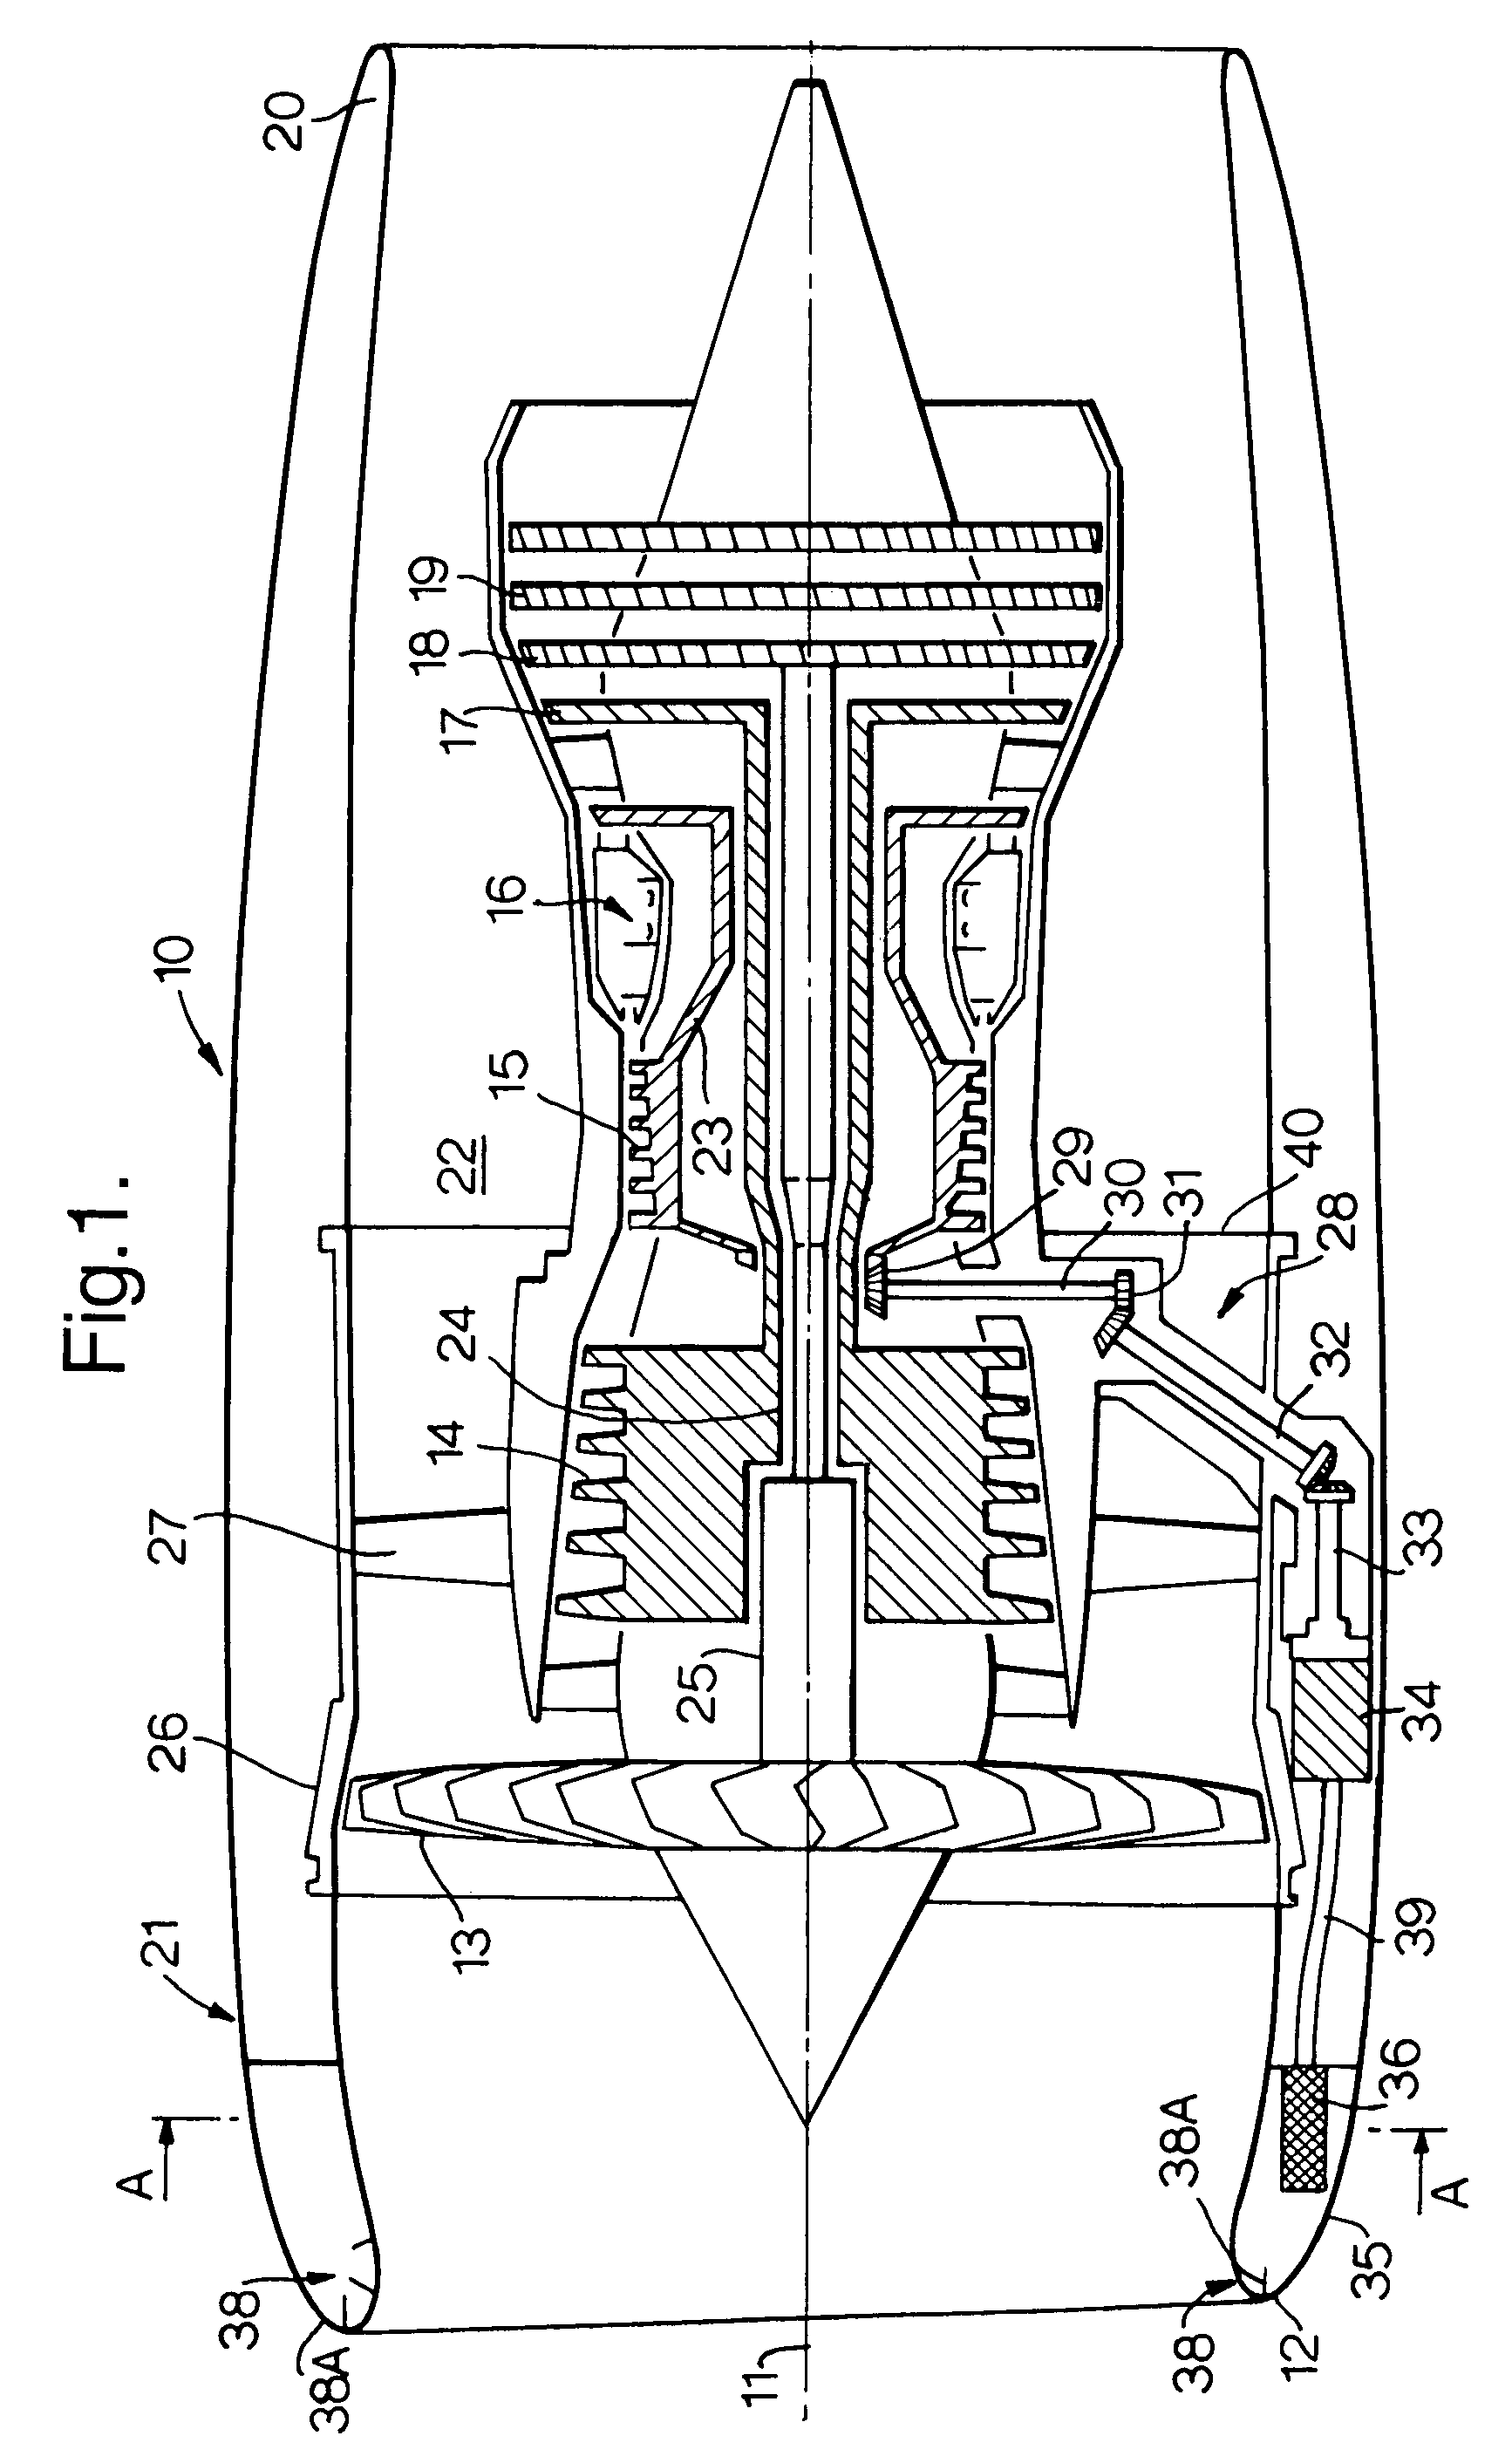 Aeroengine intake having a heat exchanger within an annular closed chamber